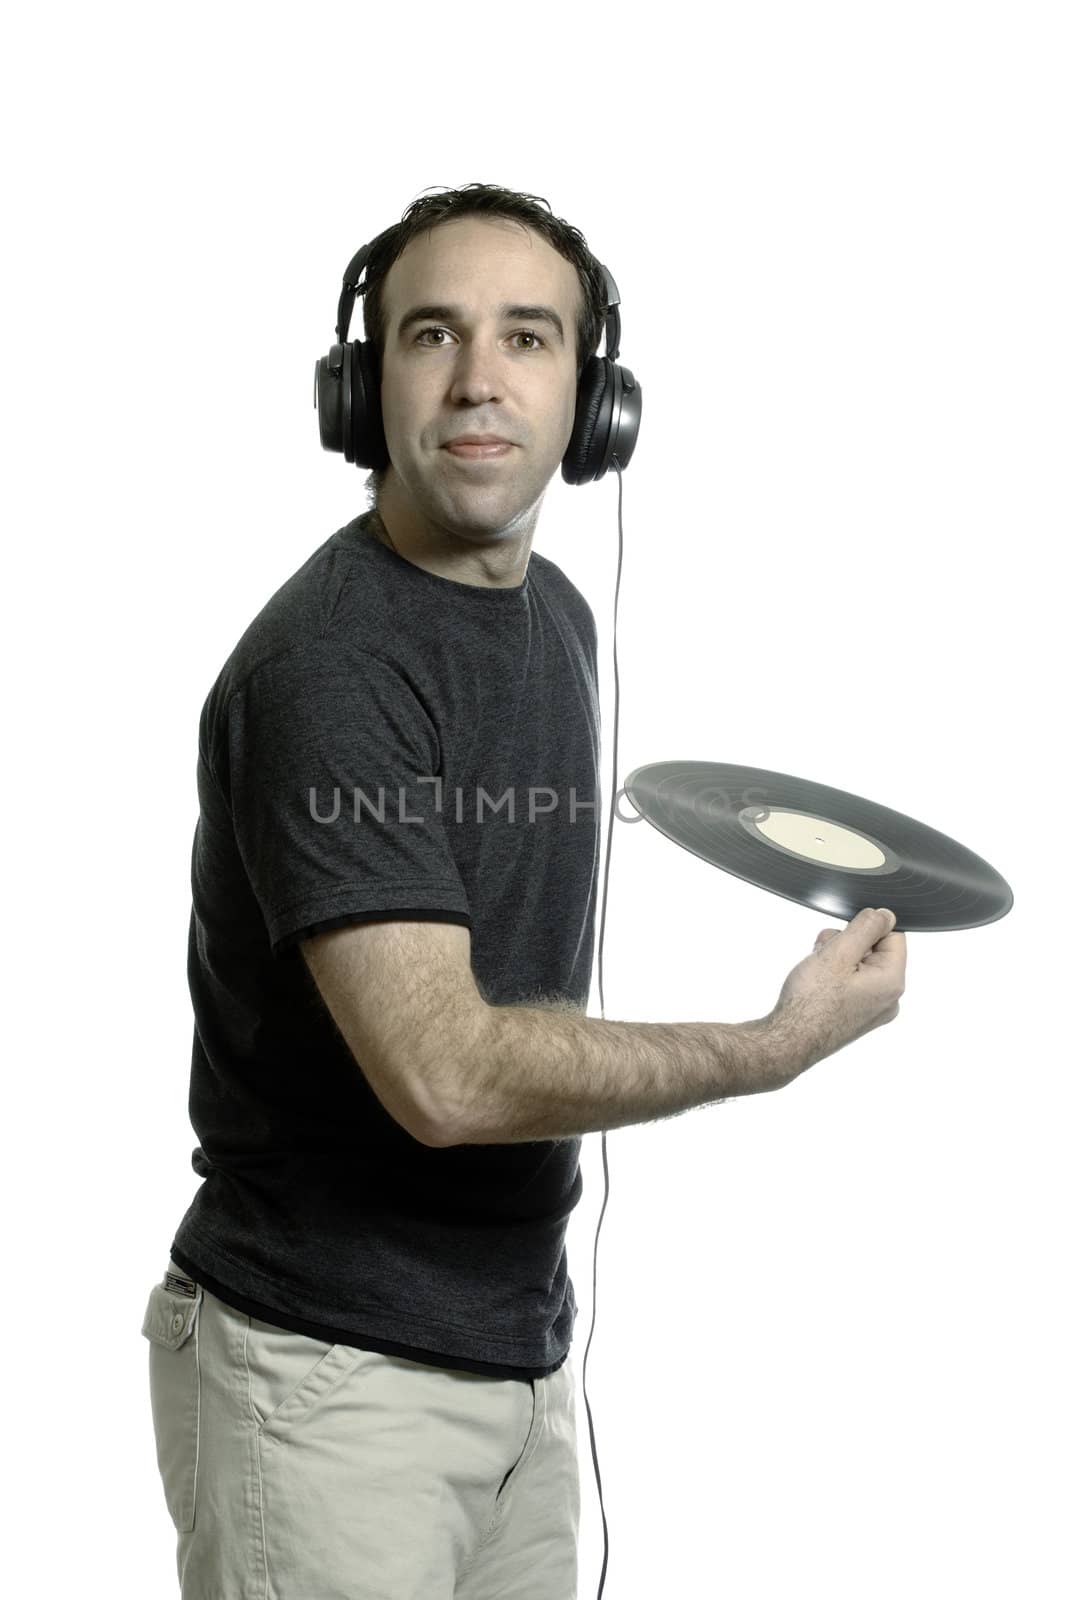 A young man wearing a set of headphones about to throw away an old LP record, isolated against a white background